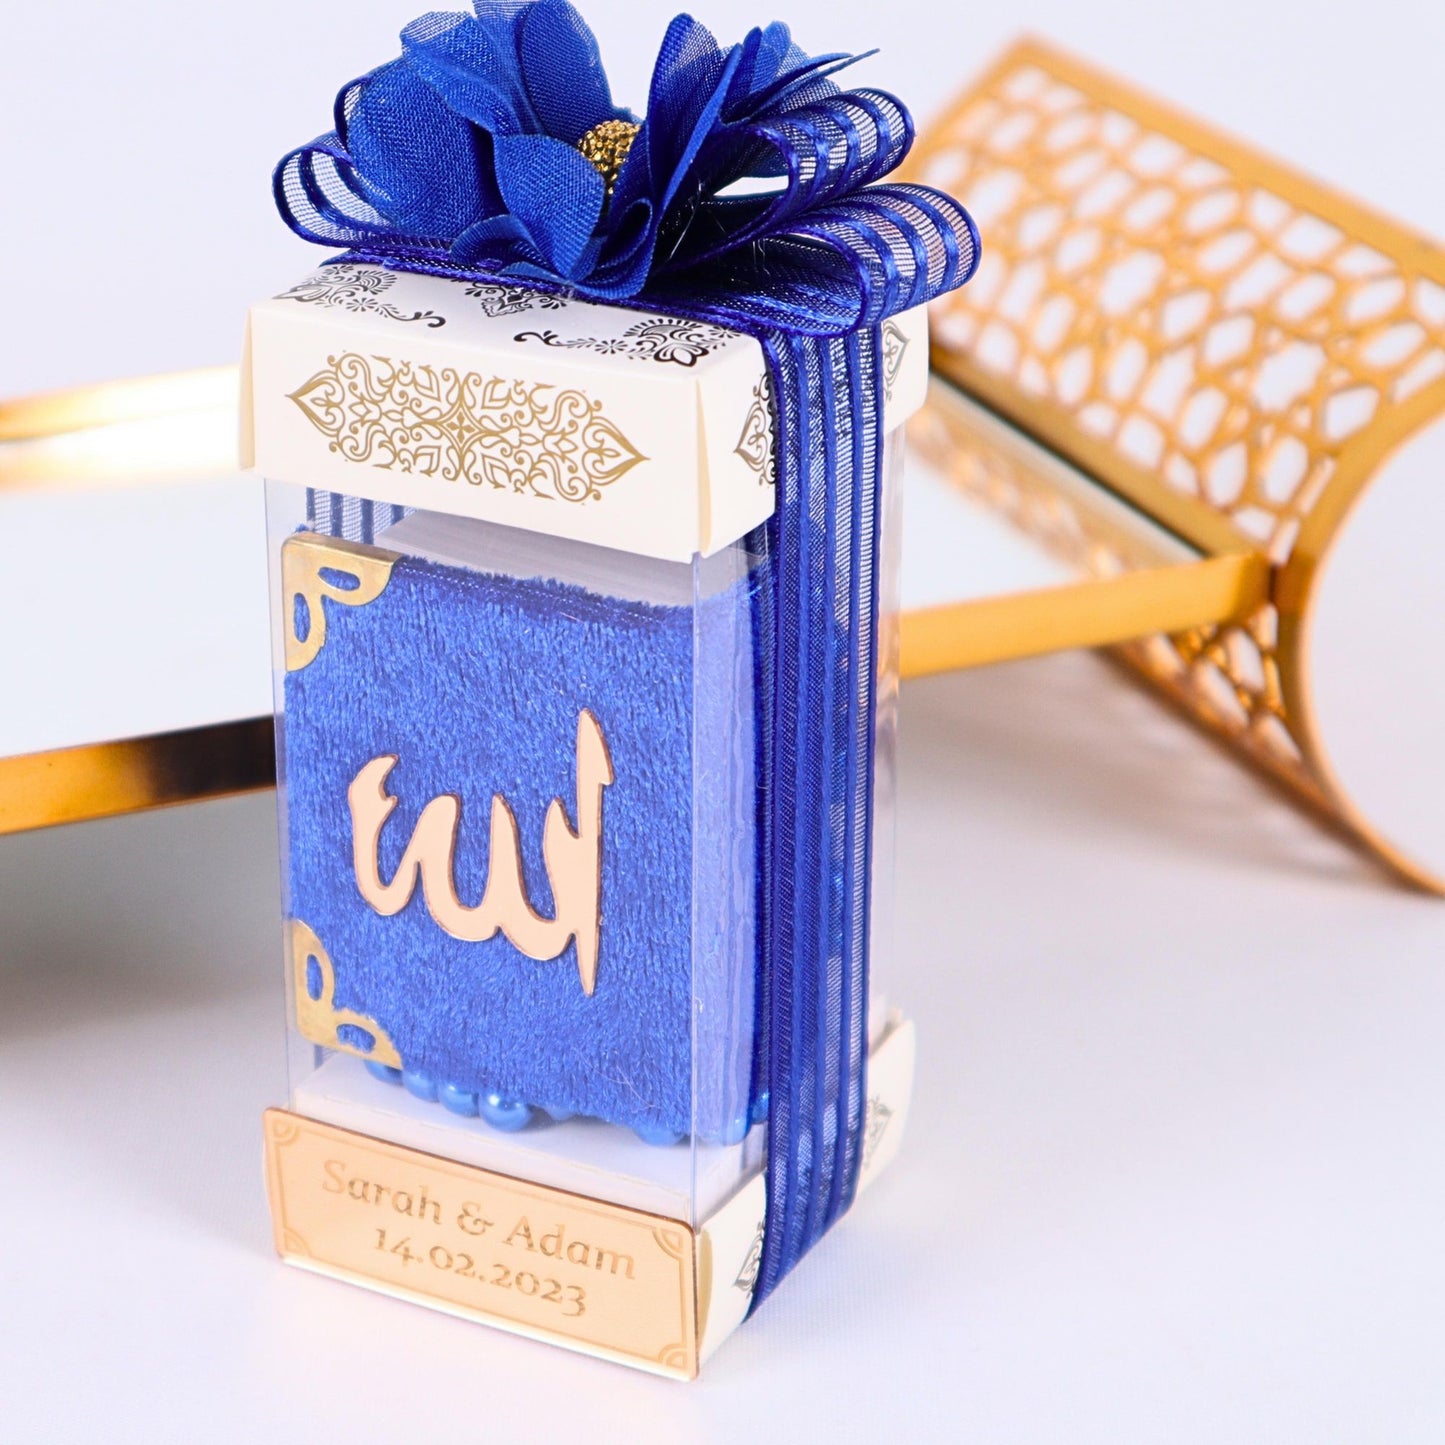 Personalized Velvet Mini Quran Pearl Tasbeeh Prism Box Wedding Favor - Islamic Elite Favors is a handmade gift shop offering a wide variety of unique and personalized gifts for all occasions. Whether you're looking for the perfect Ramadan, Eid, Hajj, wedding gift or something special for a birthday, baby shower or anniversary, we have something for everyone. High quality, made with love.